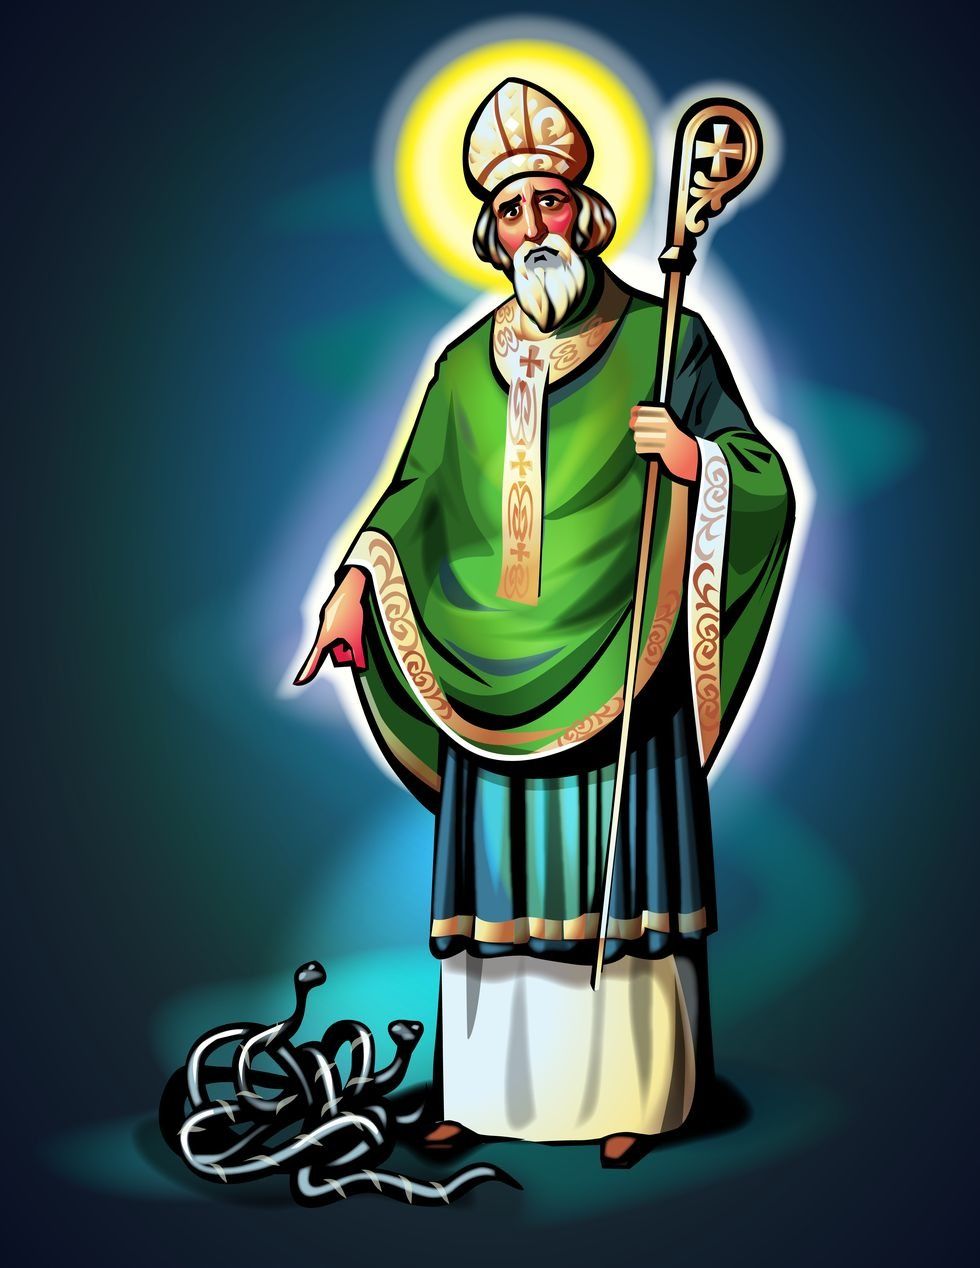 illustration of st patrick pointing to snakes